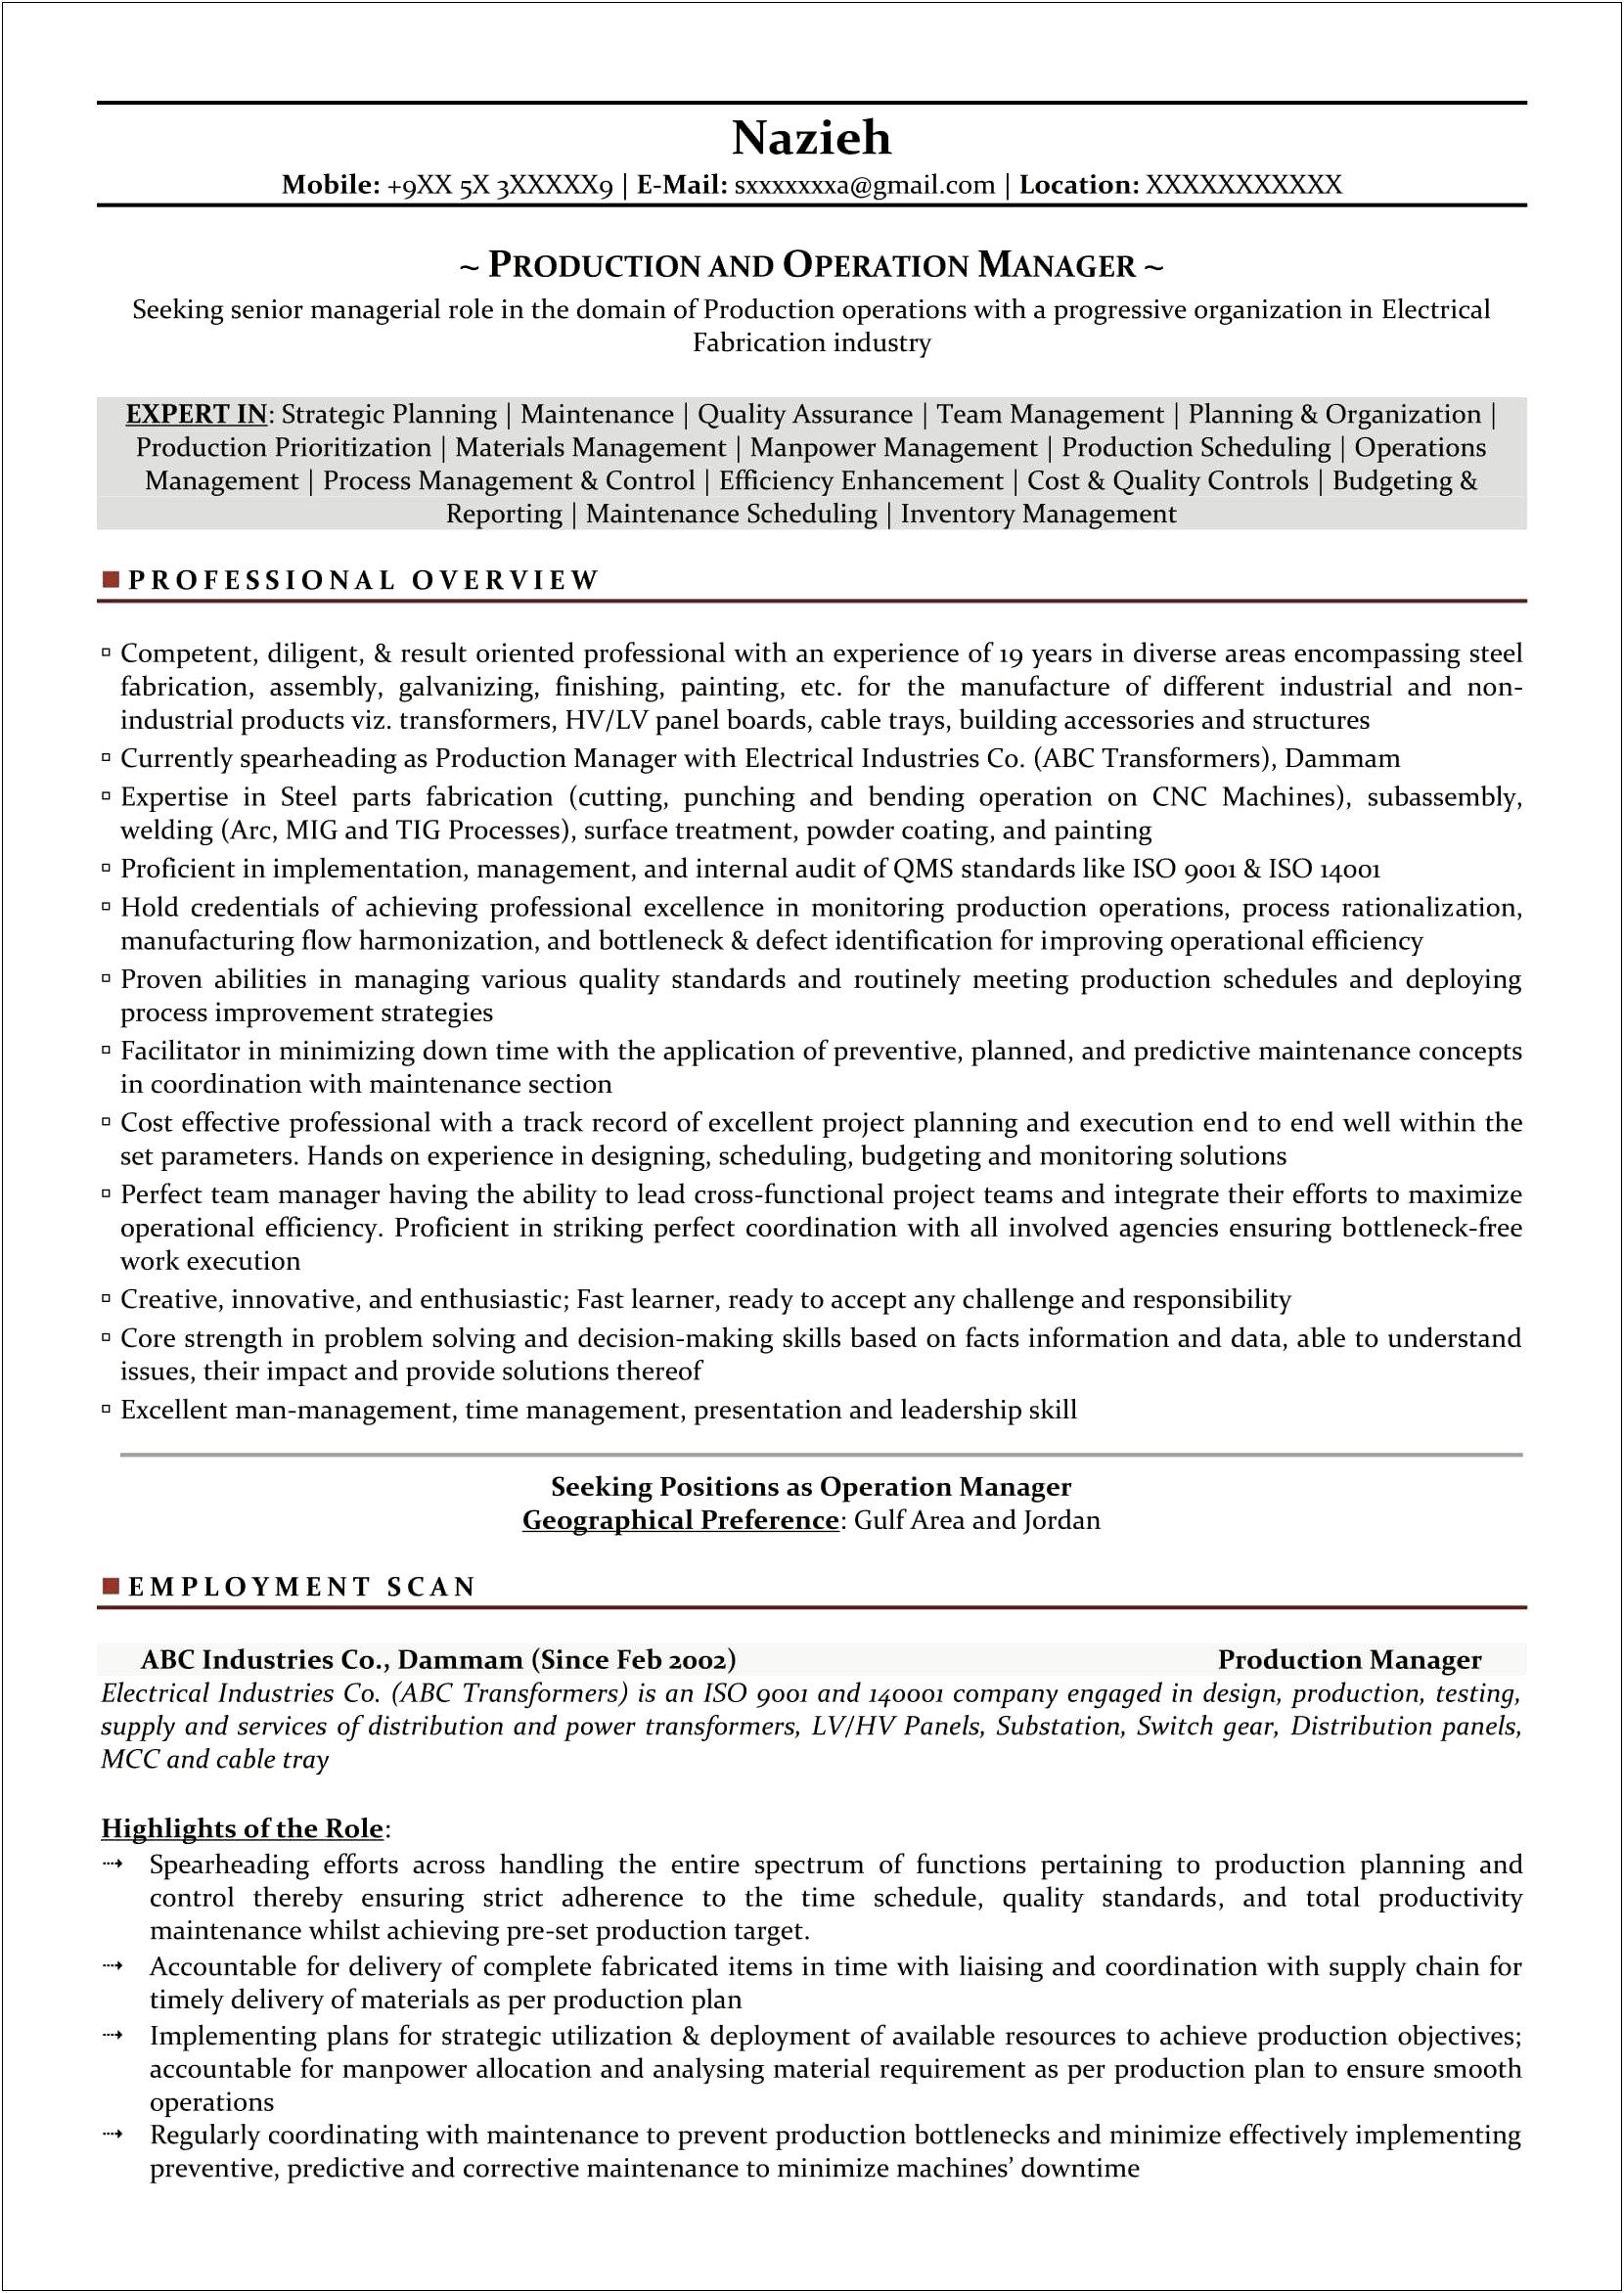 Example Of Production Manager Resume